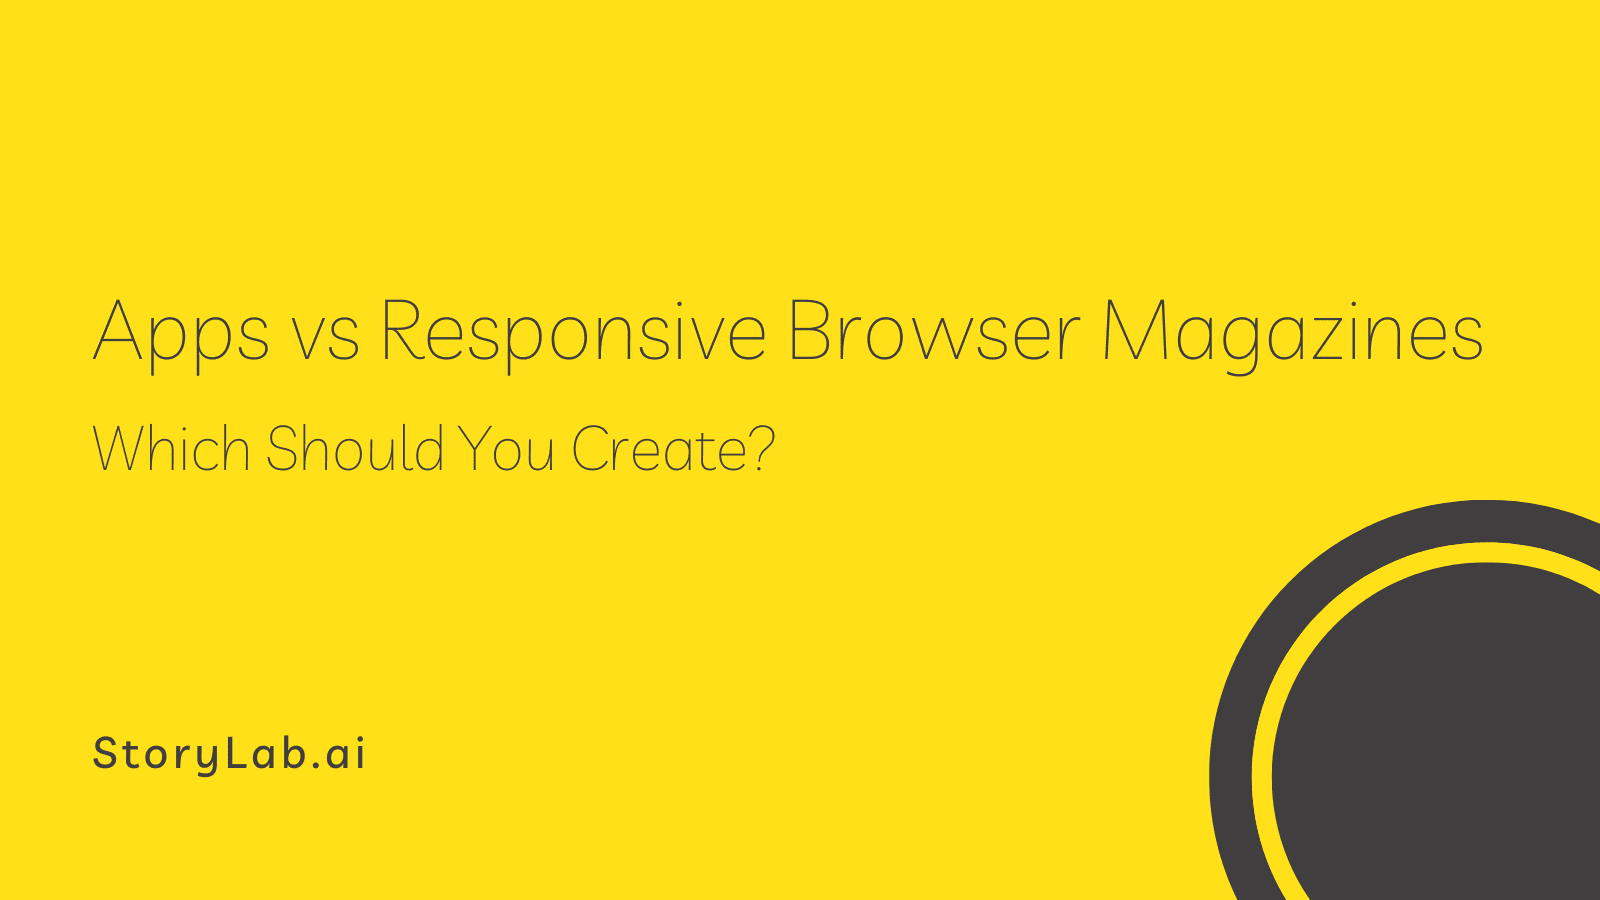 Apps vs Responsive Browser Magazines. Which Should You Create?